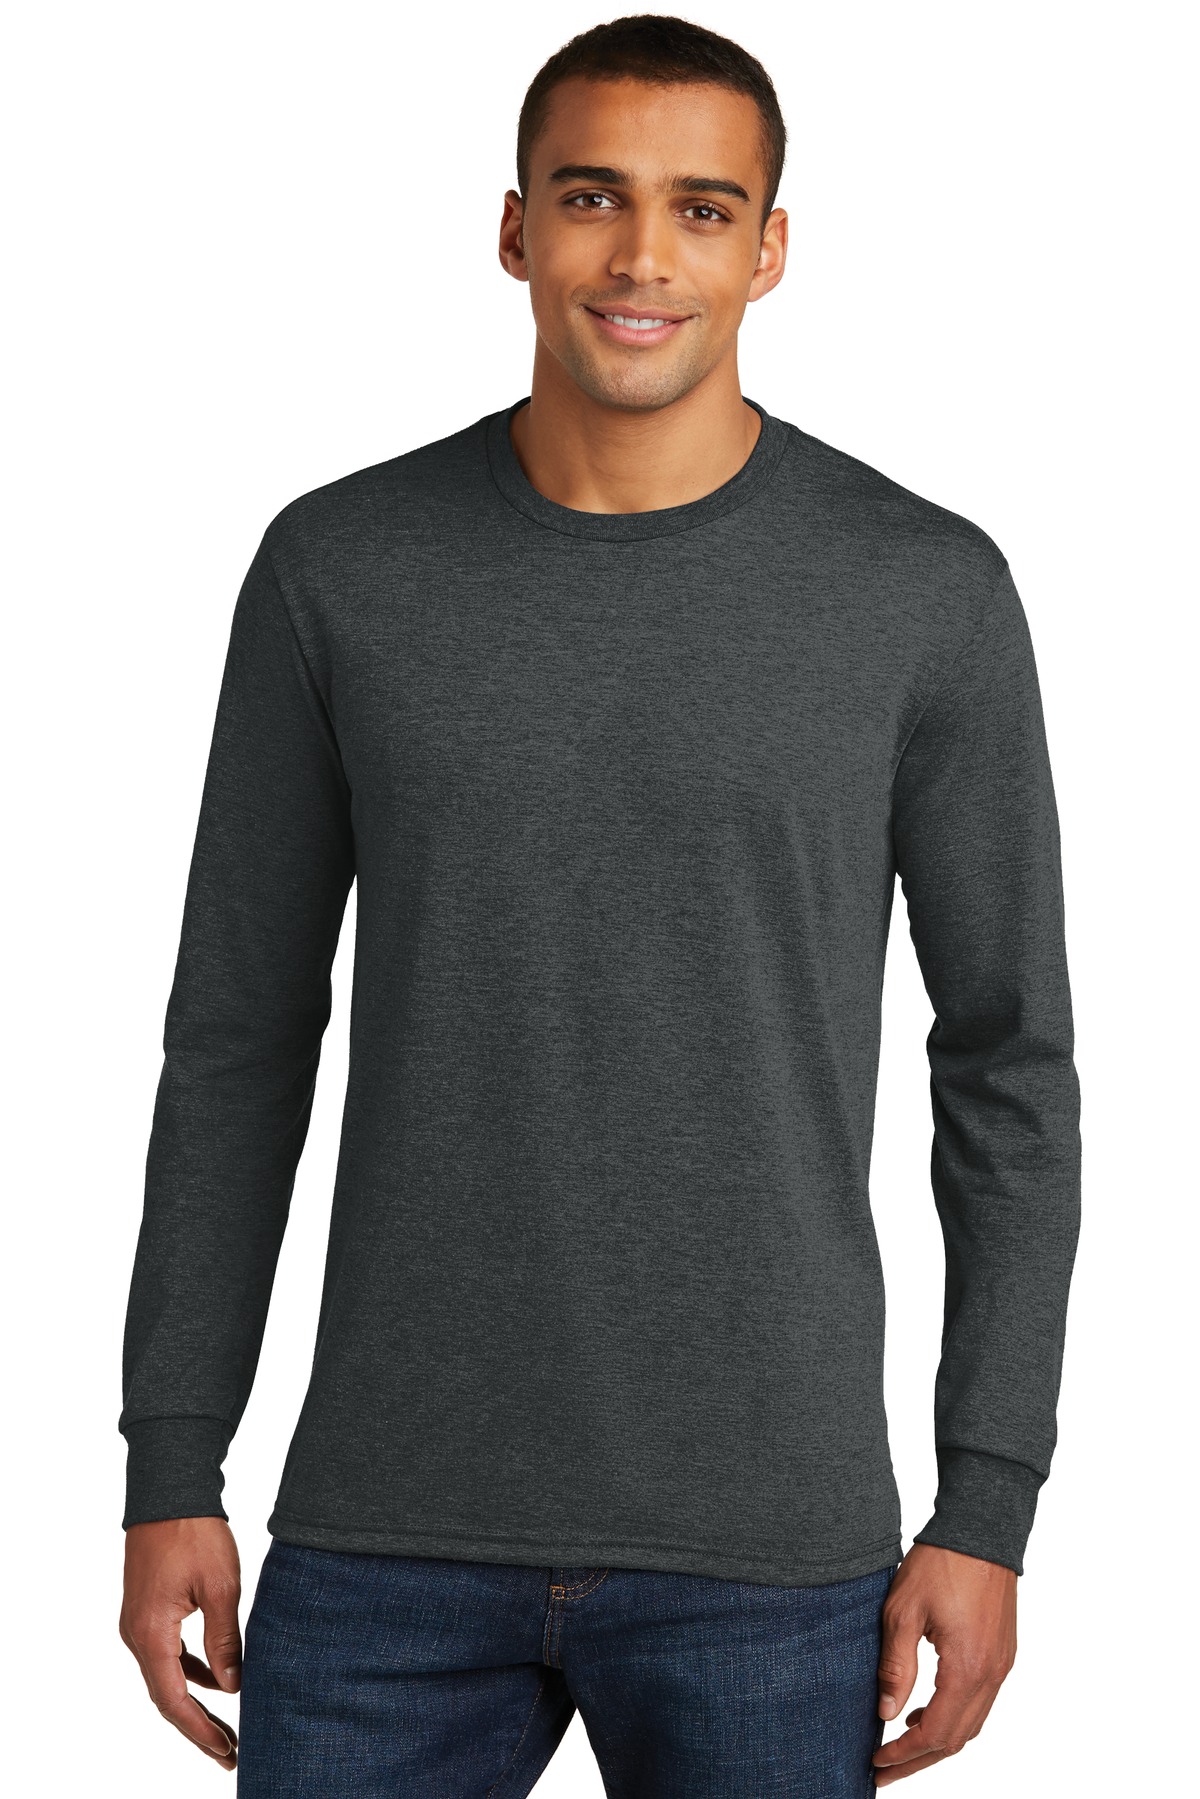 District Perfect Tri Long Sleeve Tee-District